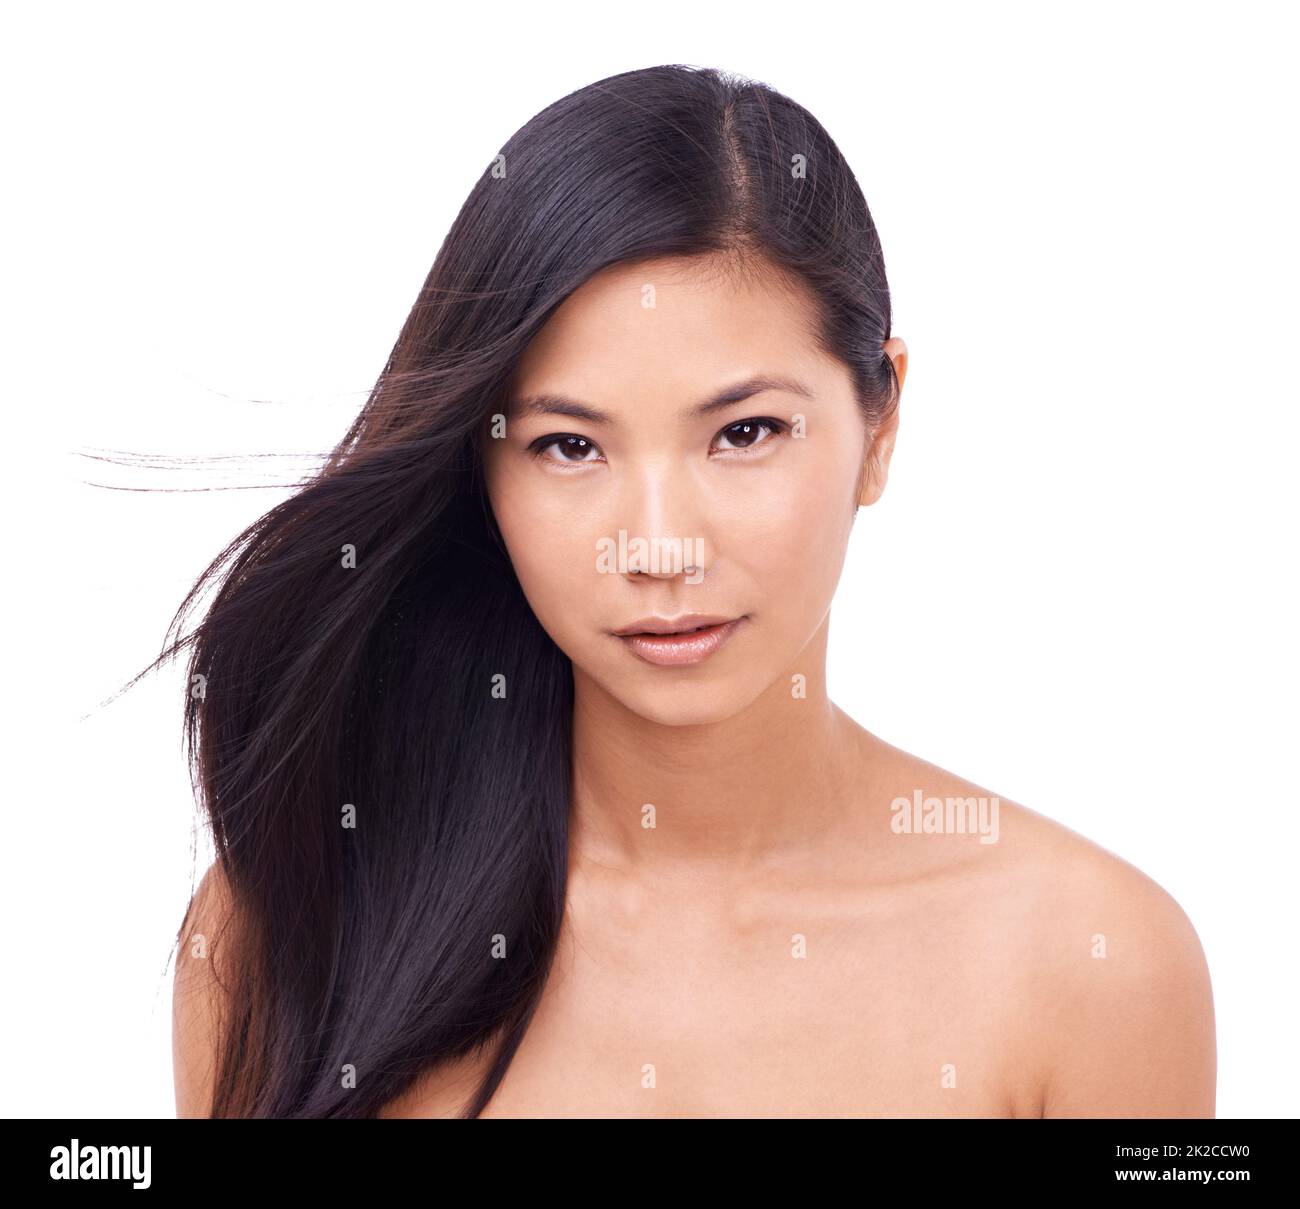 Oriental goddess. Cropped shot of a beautiful young oriental woman against a white background. Stock Photo